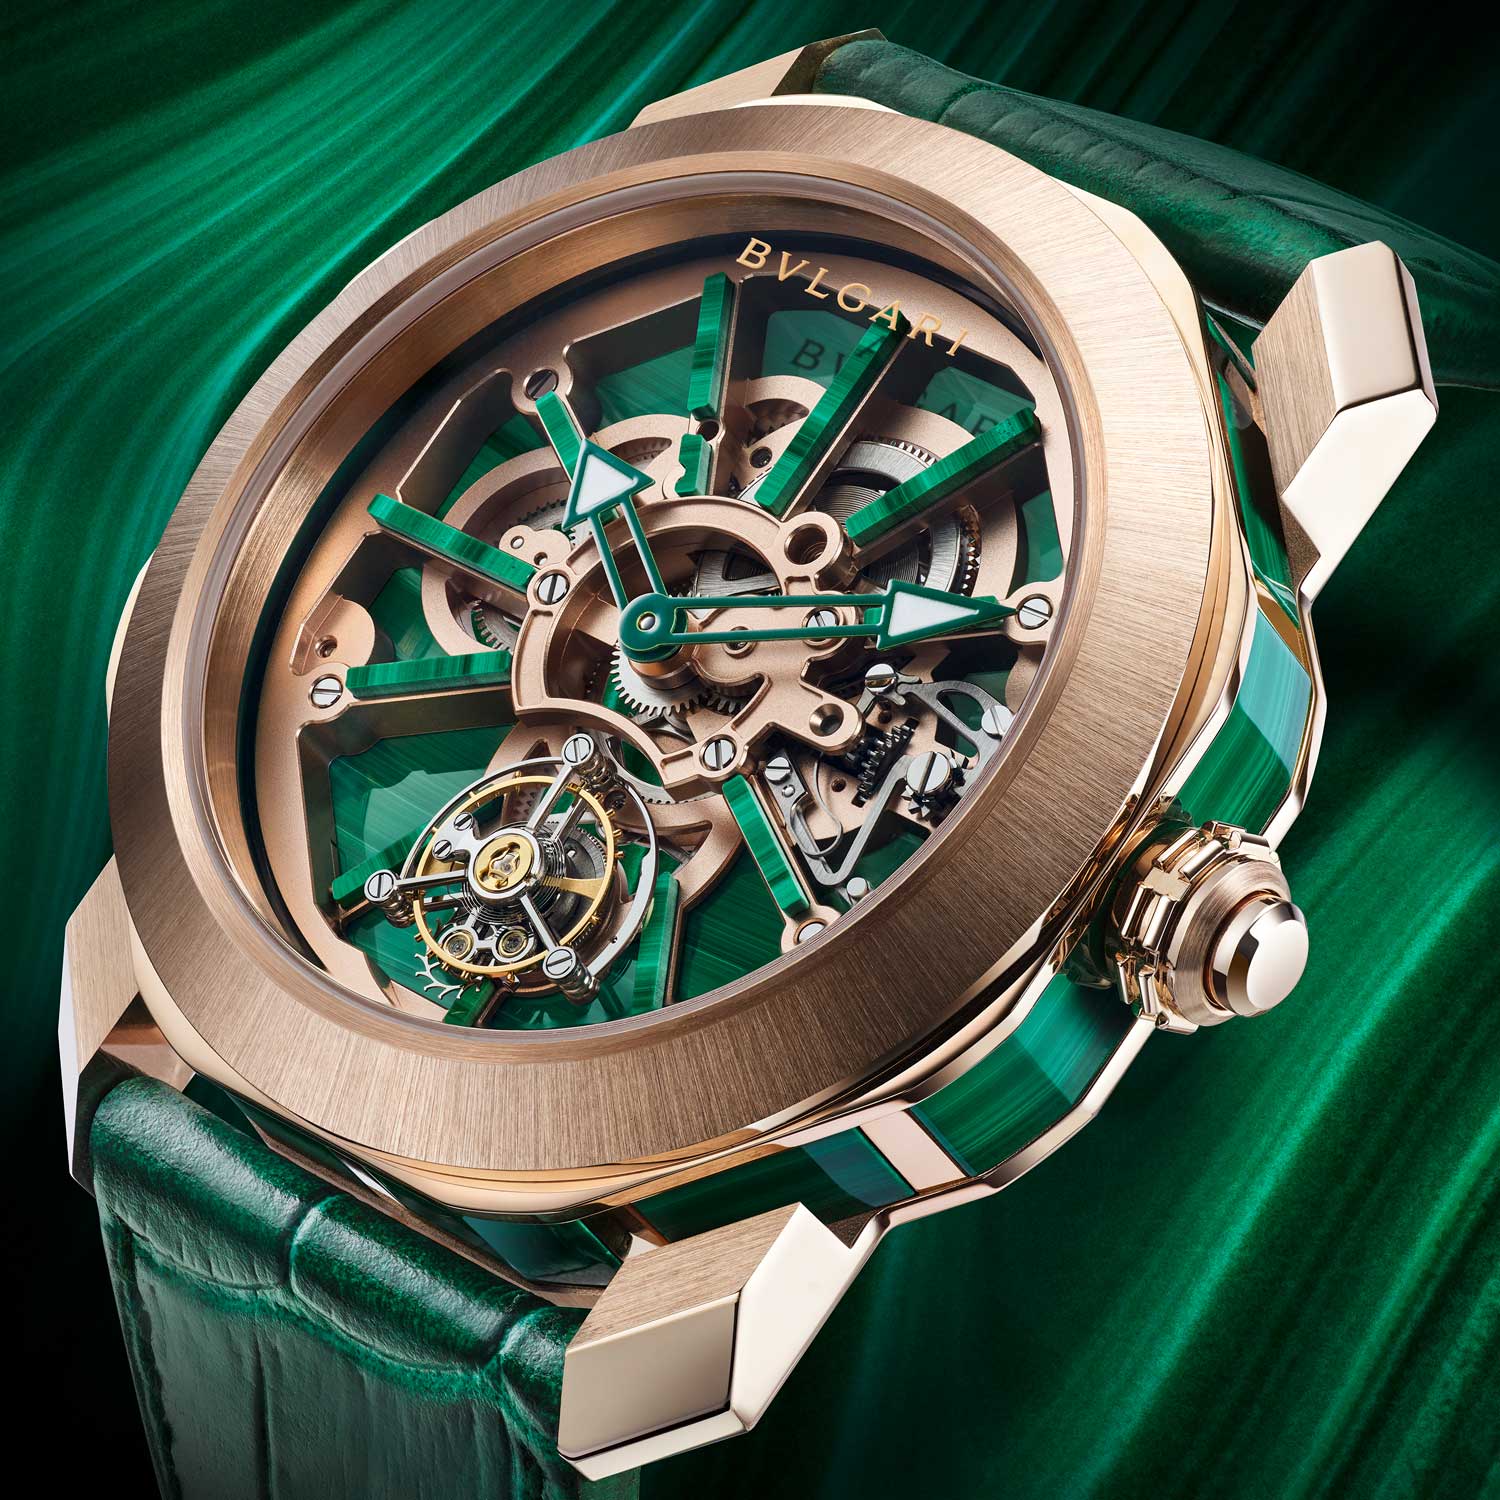 Bulgari’s new application Maestria allows its clients to personalise timepieces. Designed for a tablet device, this application will be initially available for the Octo Roma Naturalia in Bulgari boutiques only and high-jewellery- haute horlogerie events, with more collections to follow.